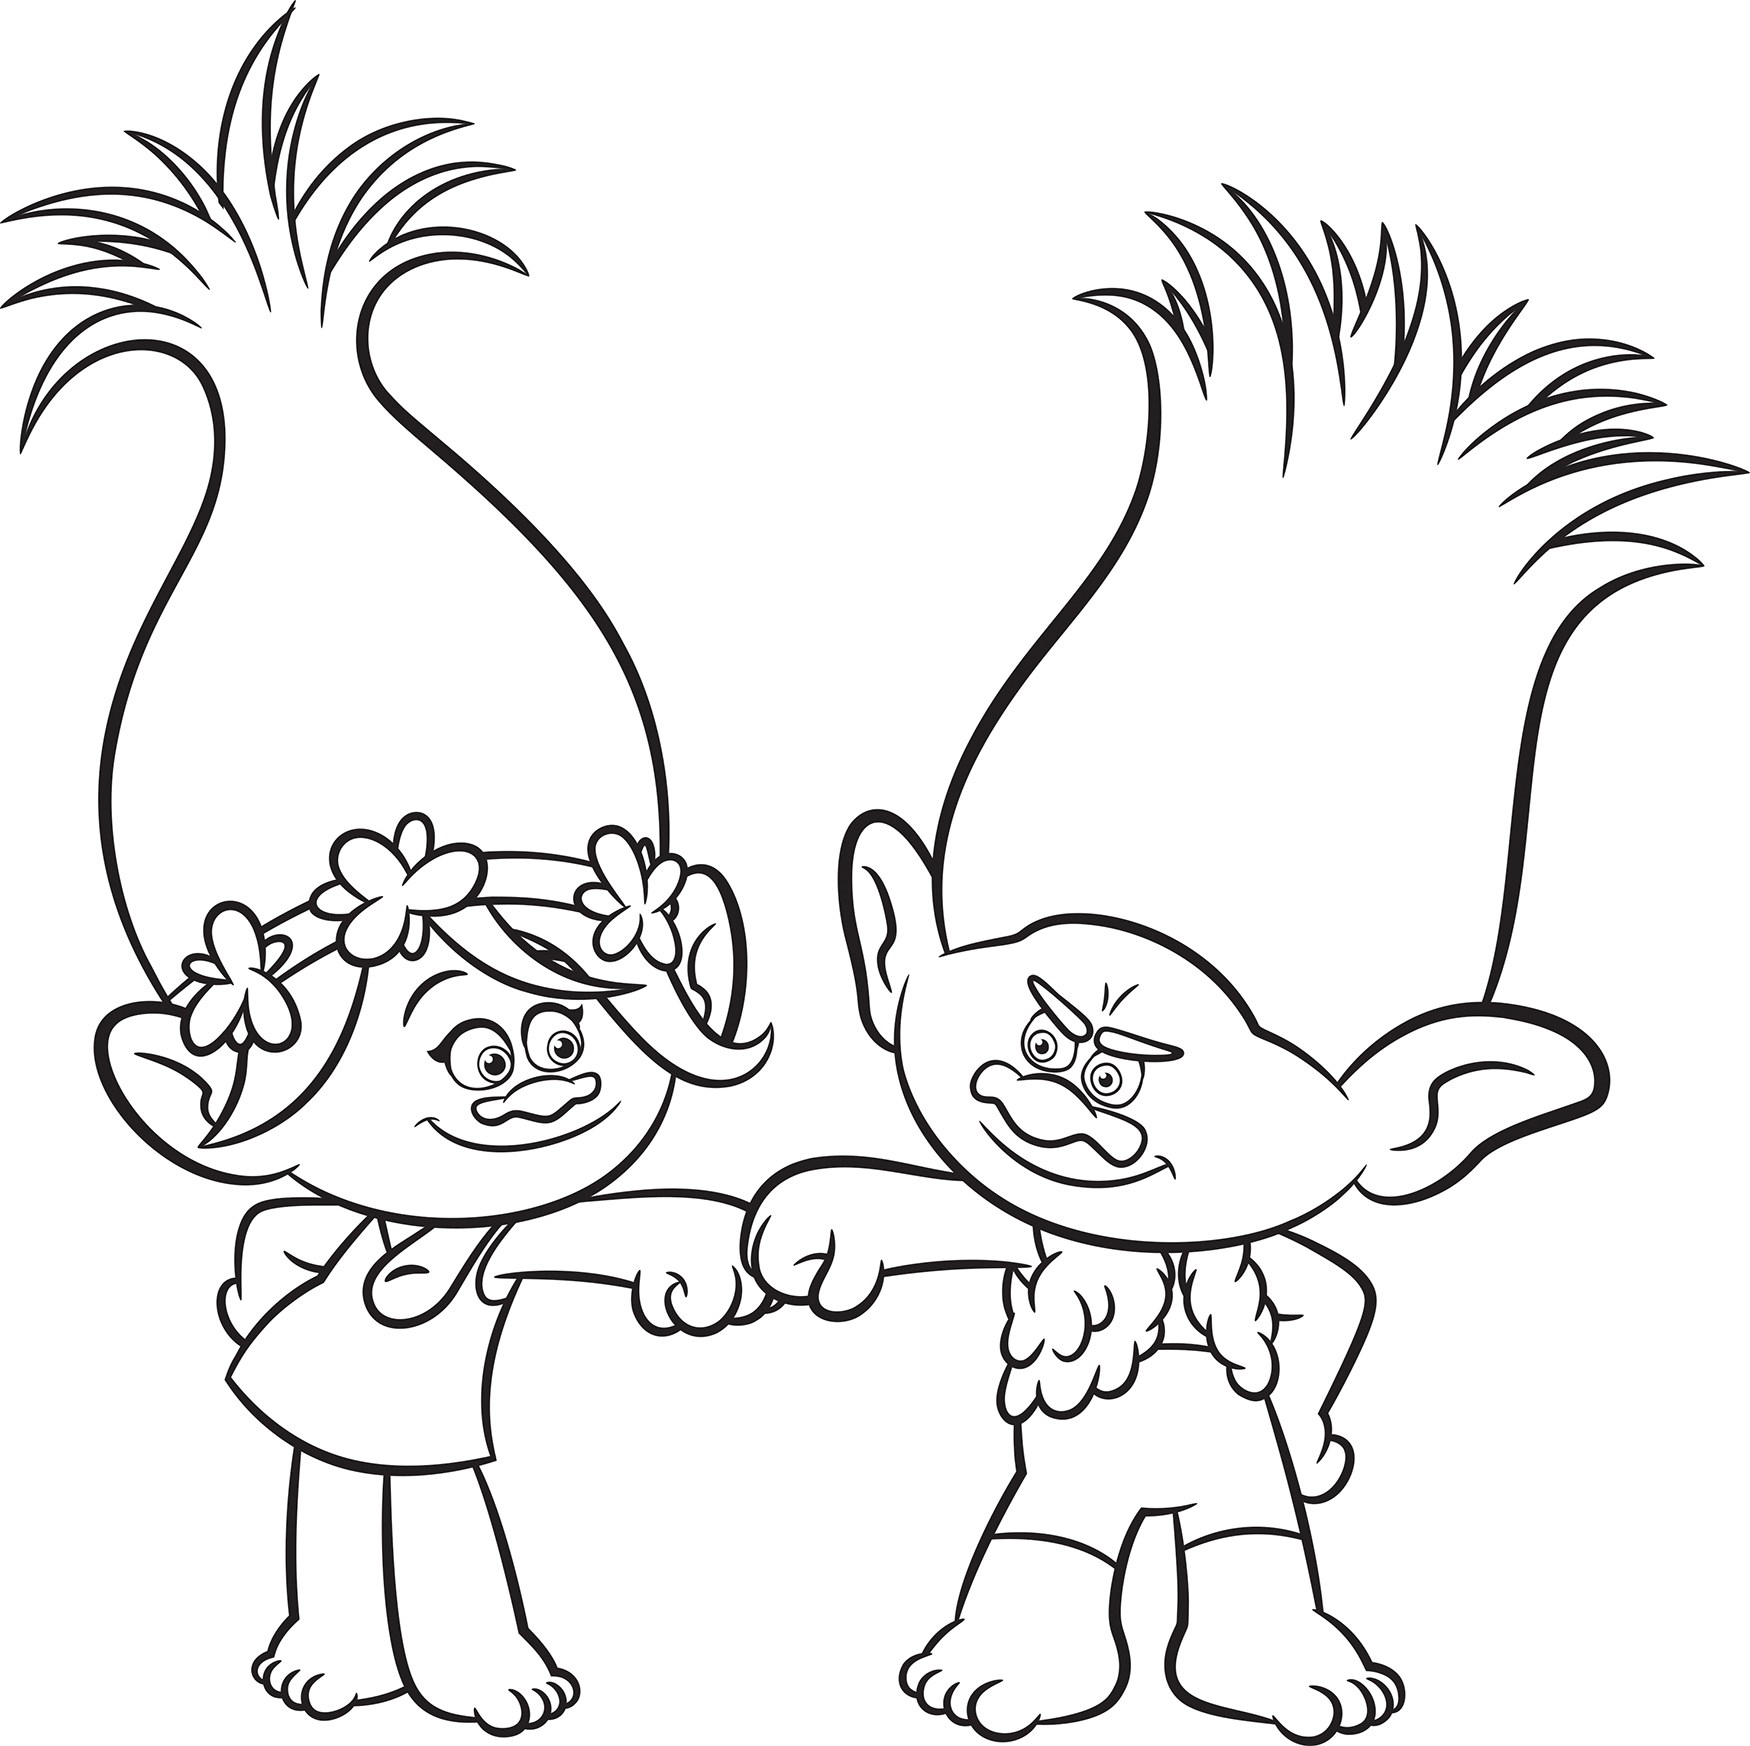 Trolls Movie Coloring Pages - Best Coloring Pages For Kids  Cartoon  coloring pages, Poppy coloring page, Disney coloring pages